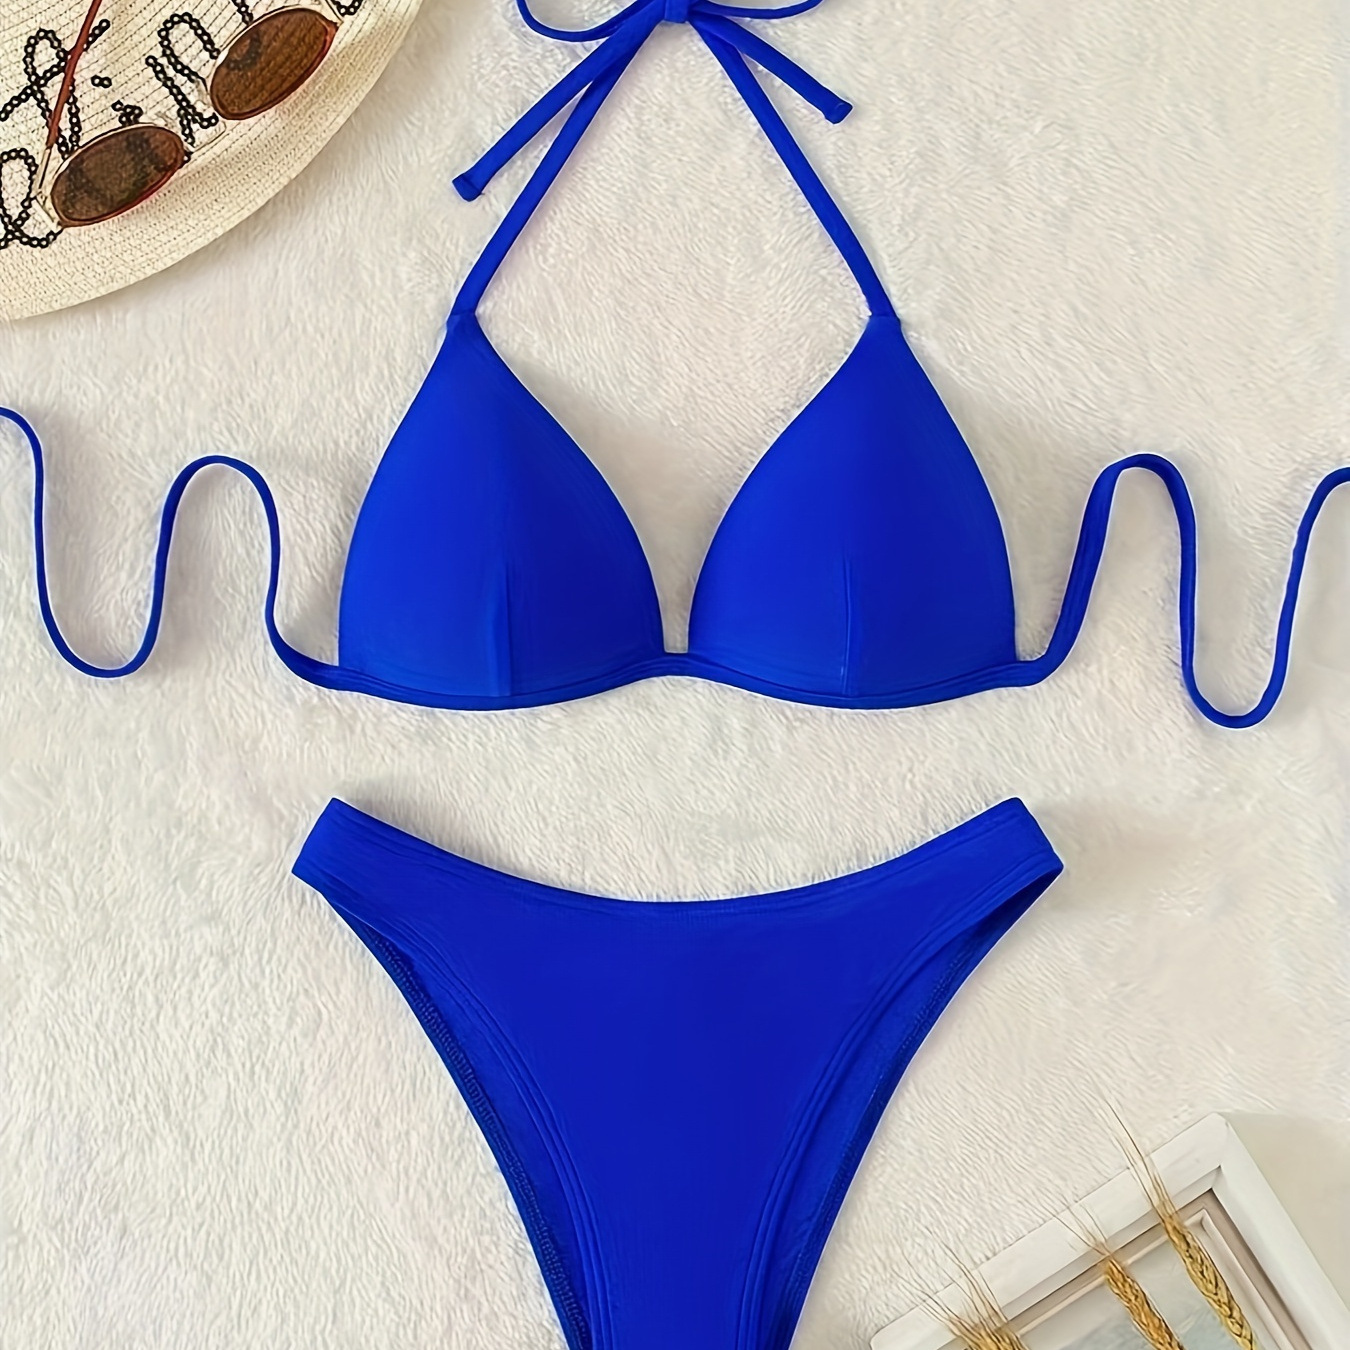 

Solid Color Bikini Set, High Cut, Halter Neck Two-piece Swimsuit, Stretchable Swimwear For Women, Pool & Beach Summer Essential